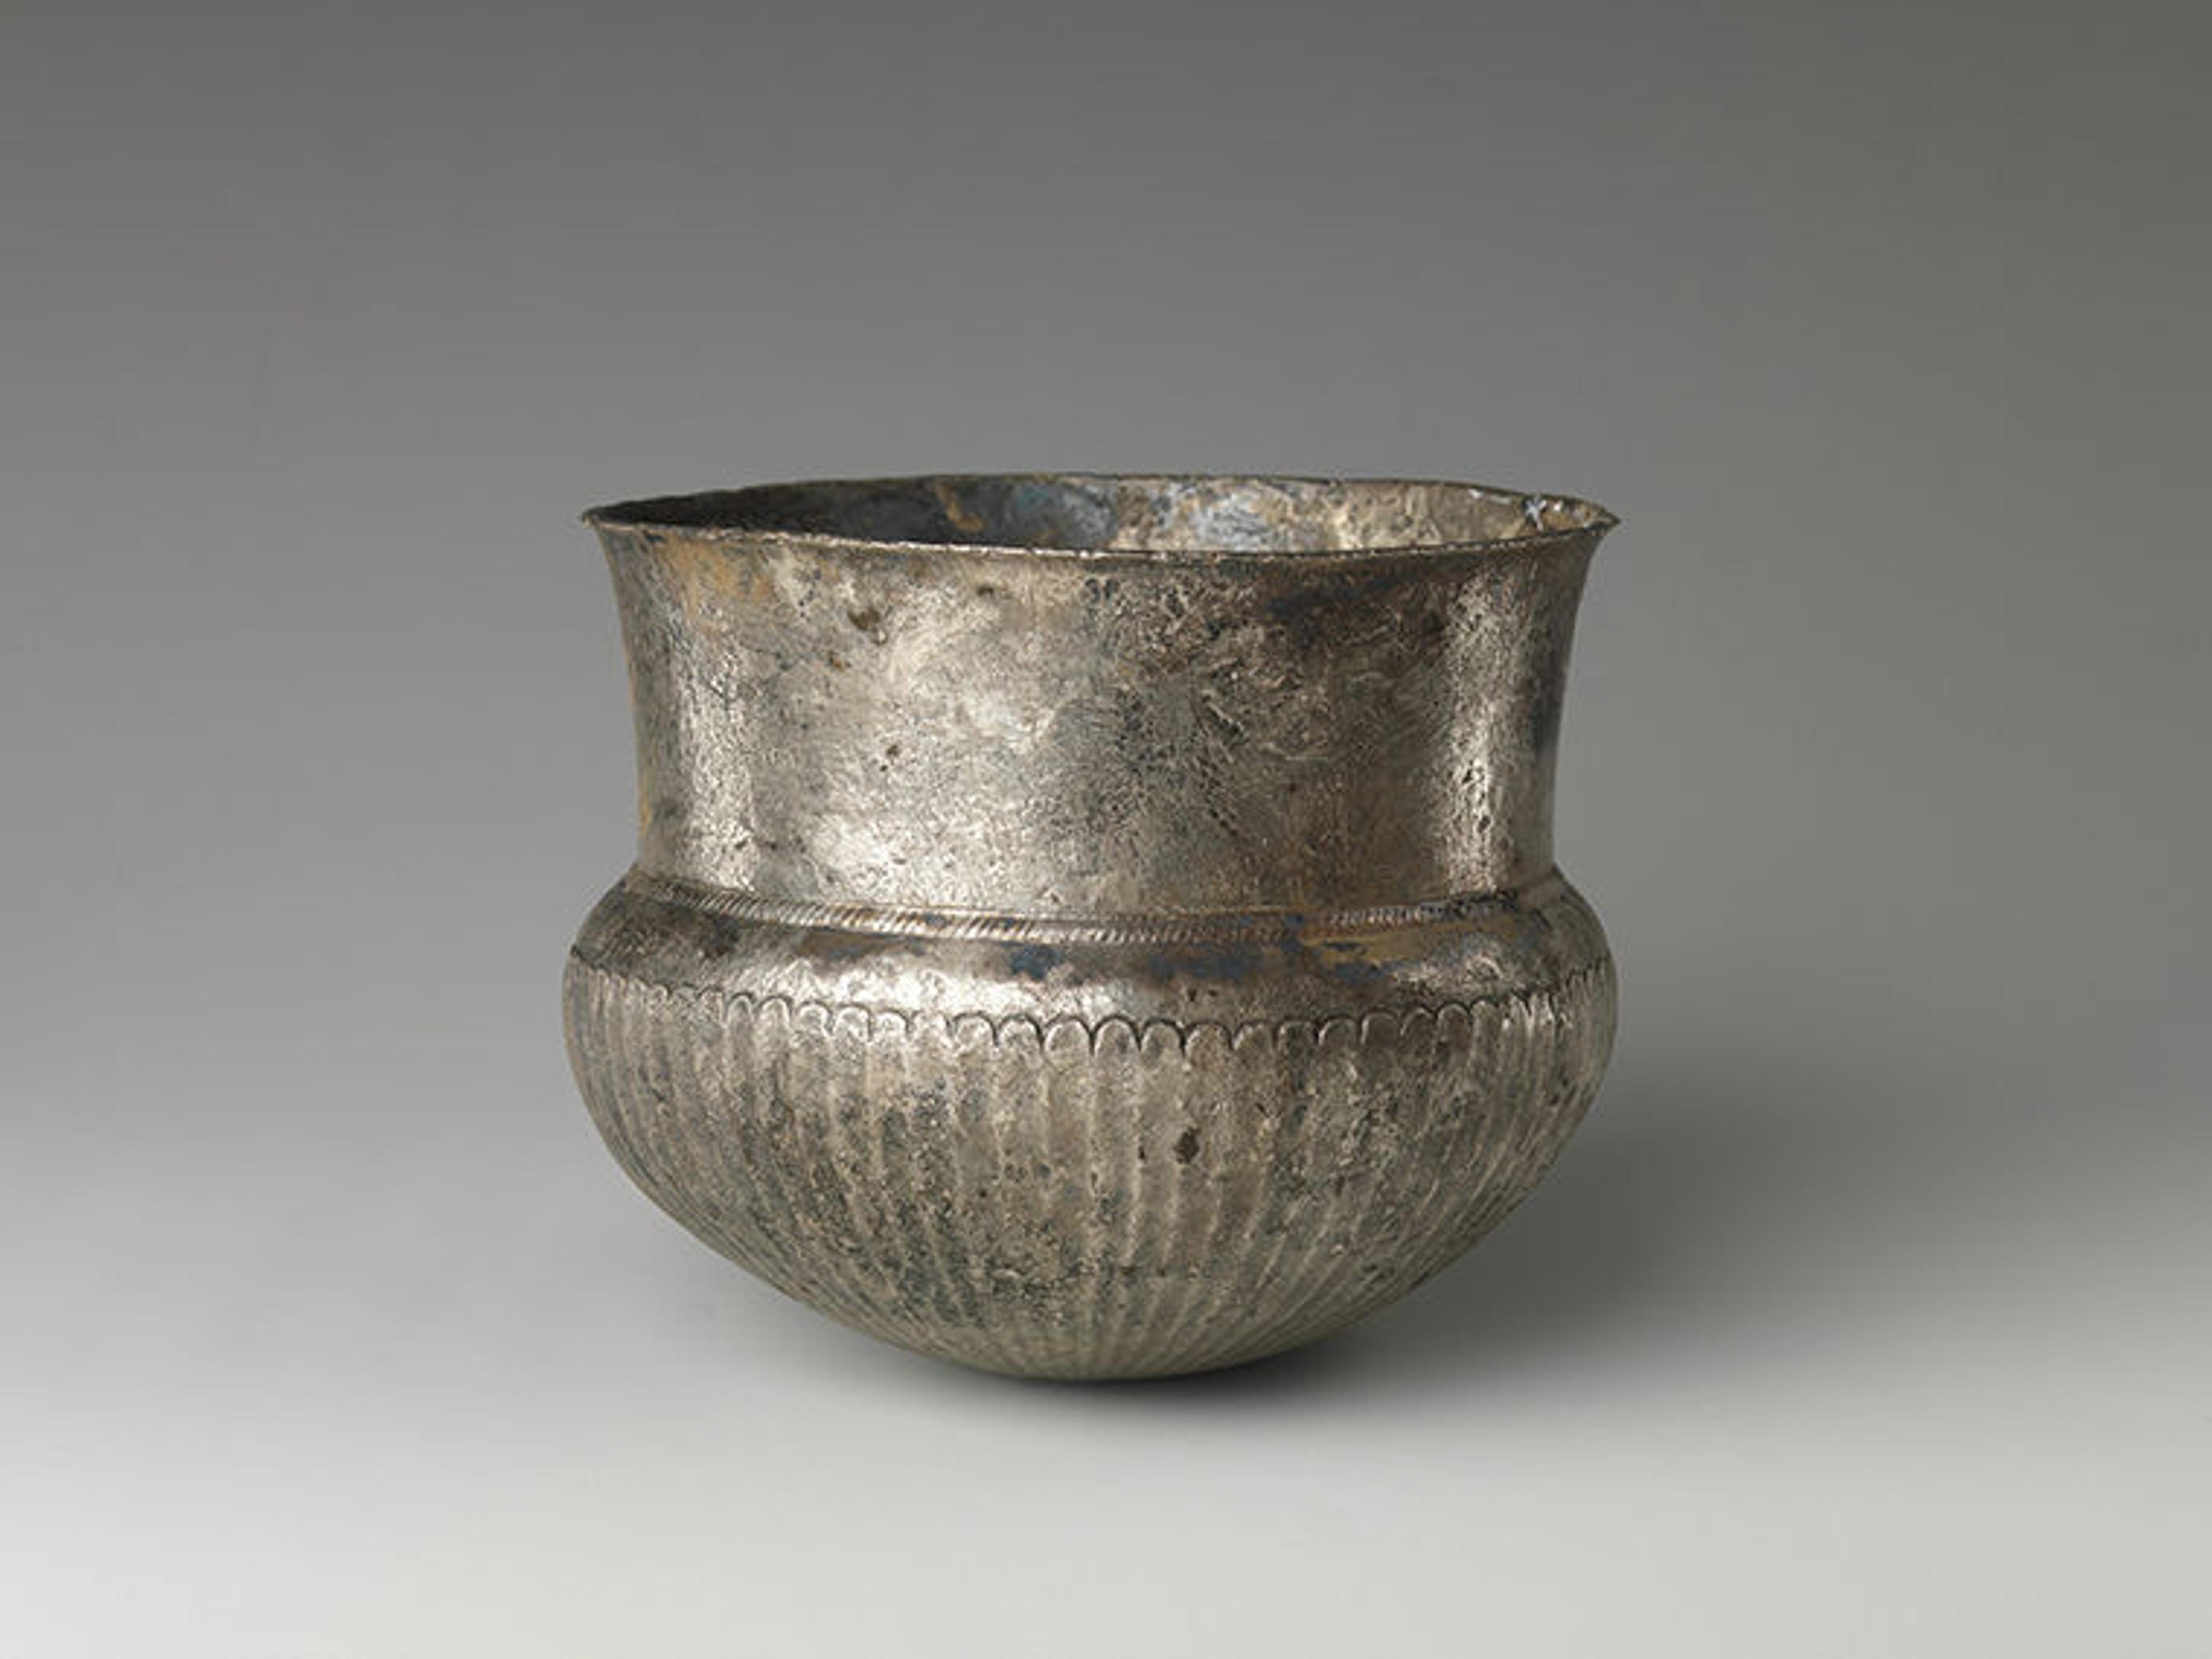 Bowl with flutes from shoulder to rosette at base